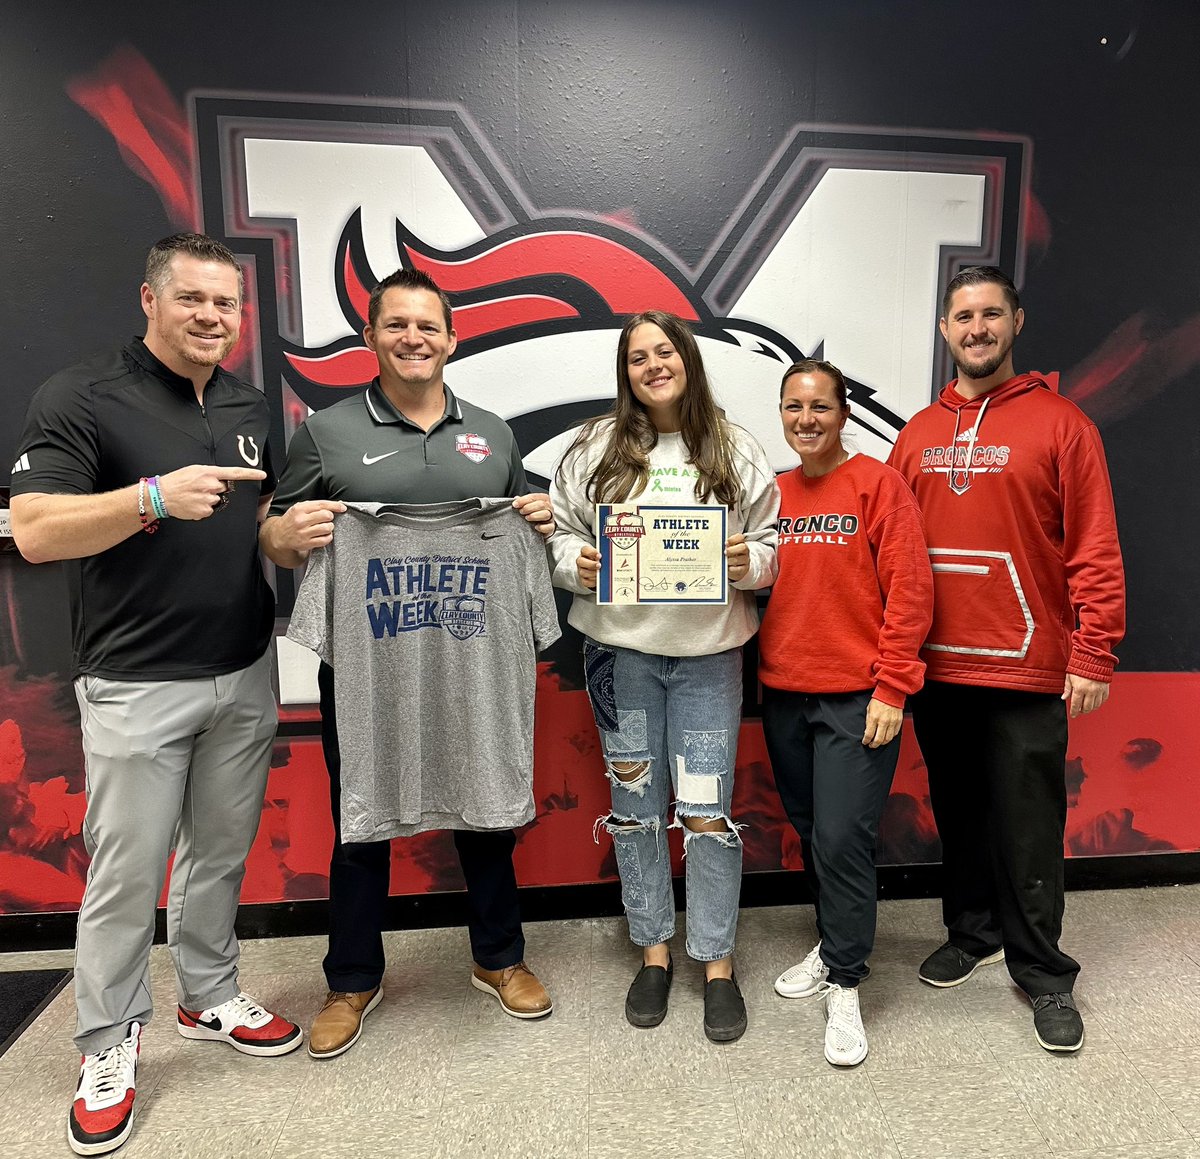 🚨ATHLETE OF THE WEEK🚨 Congrats to Alyssa Prather from @MiddleburgSB for being selected as our @Preferred_PT / @SoutheastOrthos Clay County Athlete of The Week‼️ 🔵 Sport: 🥎 🔵 575 bat avg 🔵 23 hits 🔵 19 RBI 🔵 6 DBL 🔵 4 HR 🔵 13-1 record Apparel Sponsor: @BSNSPORTS_NoFL